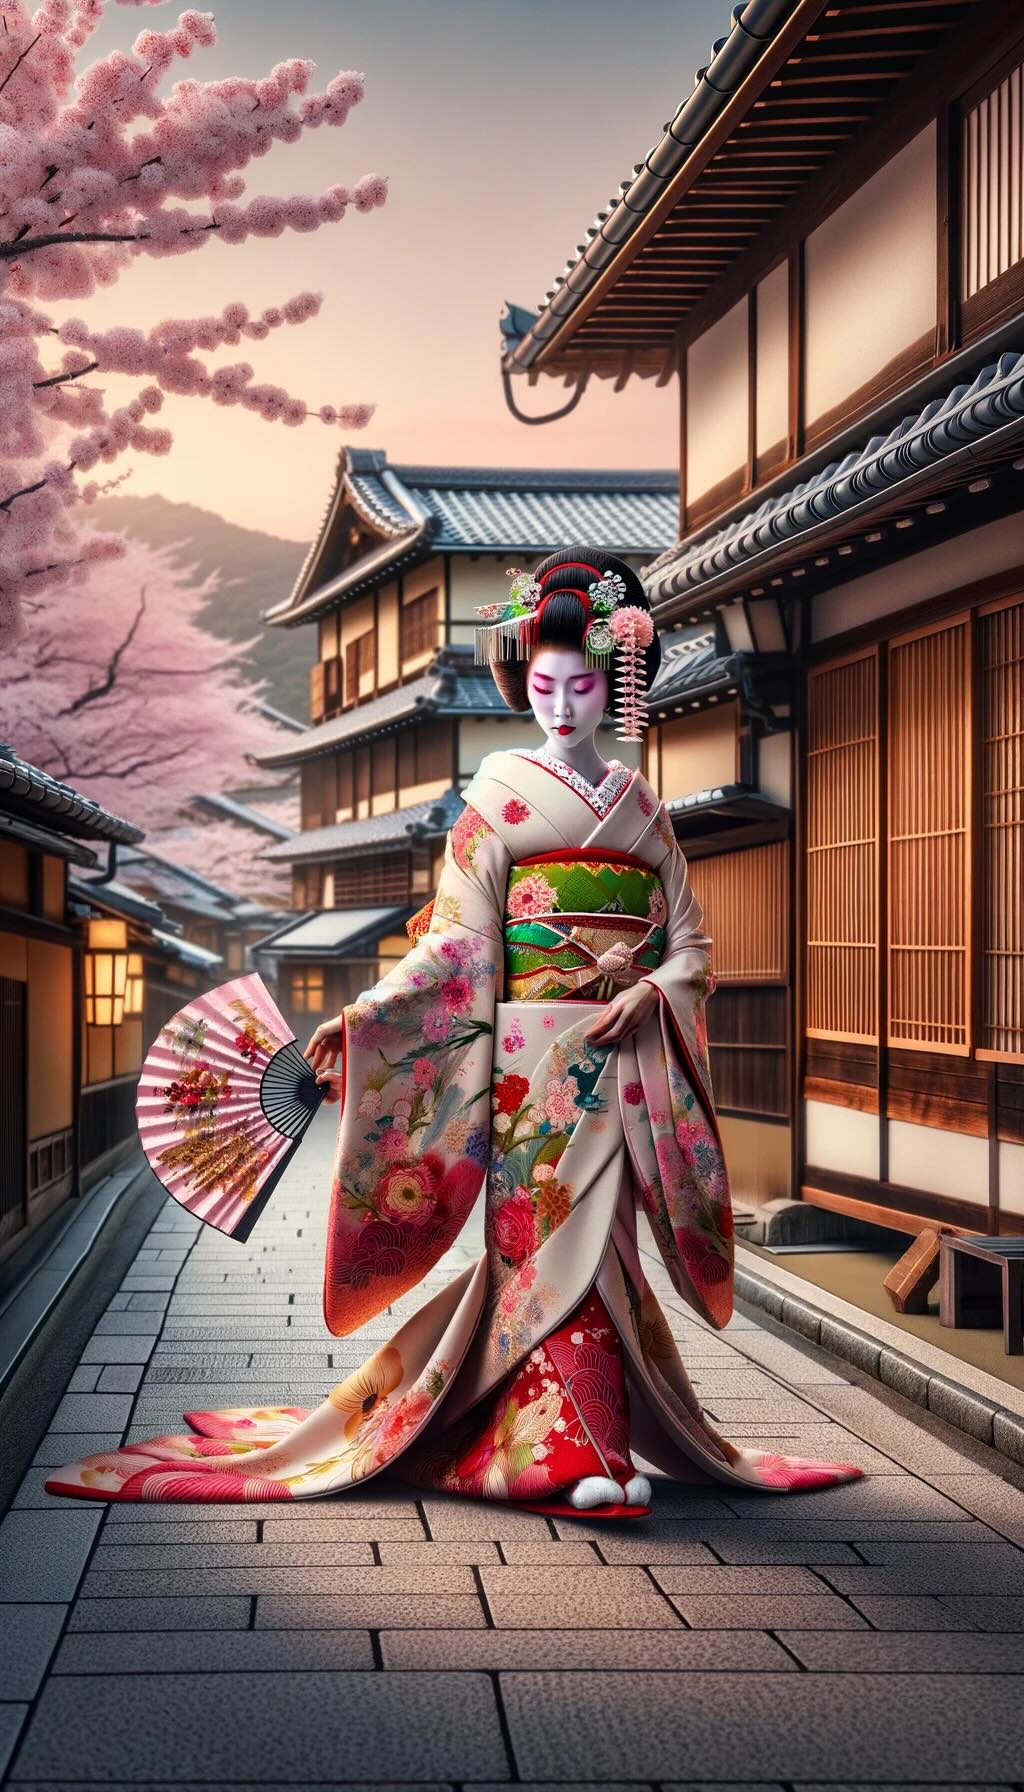 Depicting a Geisha in a traditional setting in Kyoto, Japan captures the essence of Japanese culture, showcasing the Geisha's elegance and the picturesque surroundings.